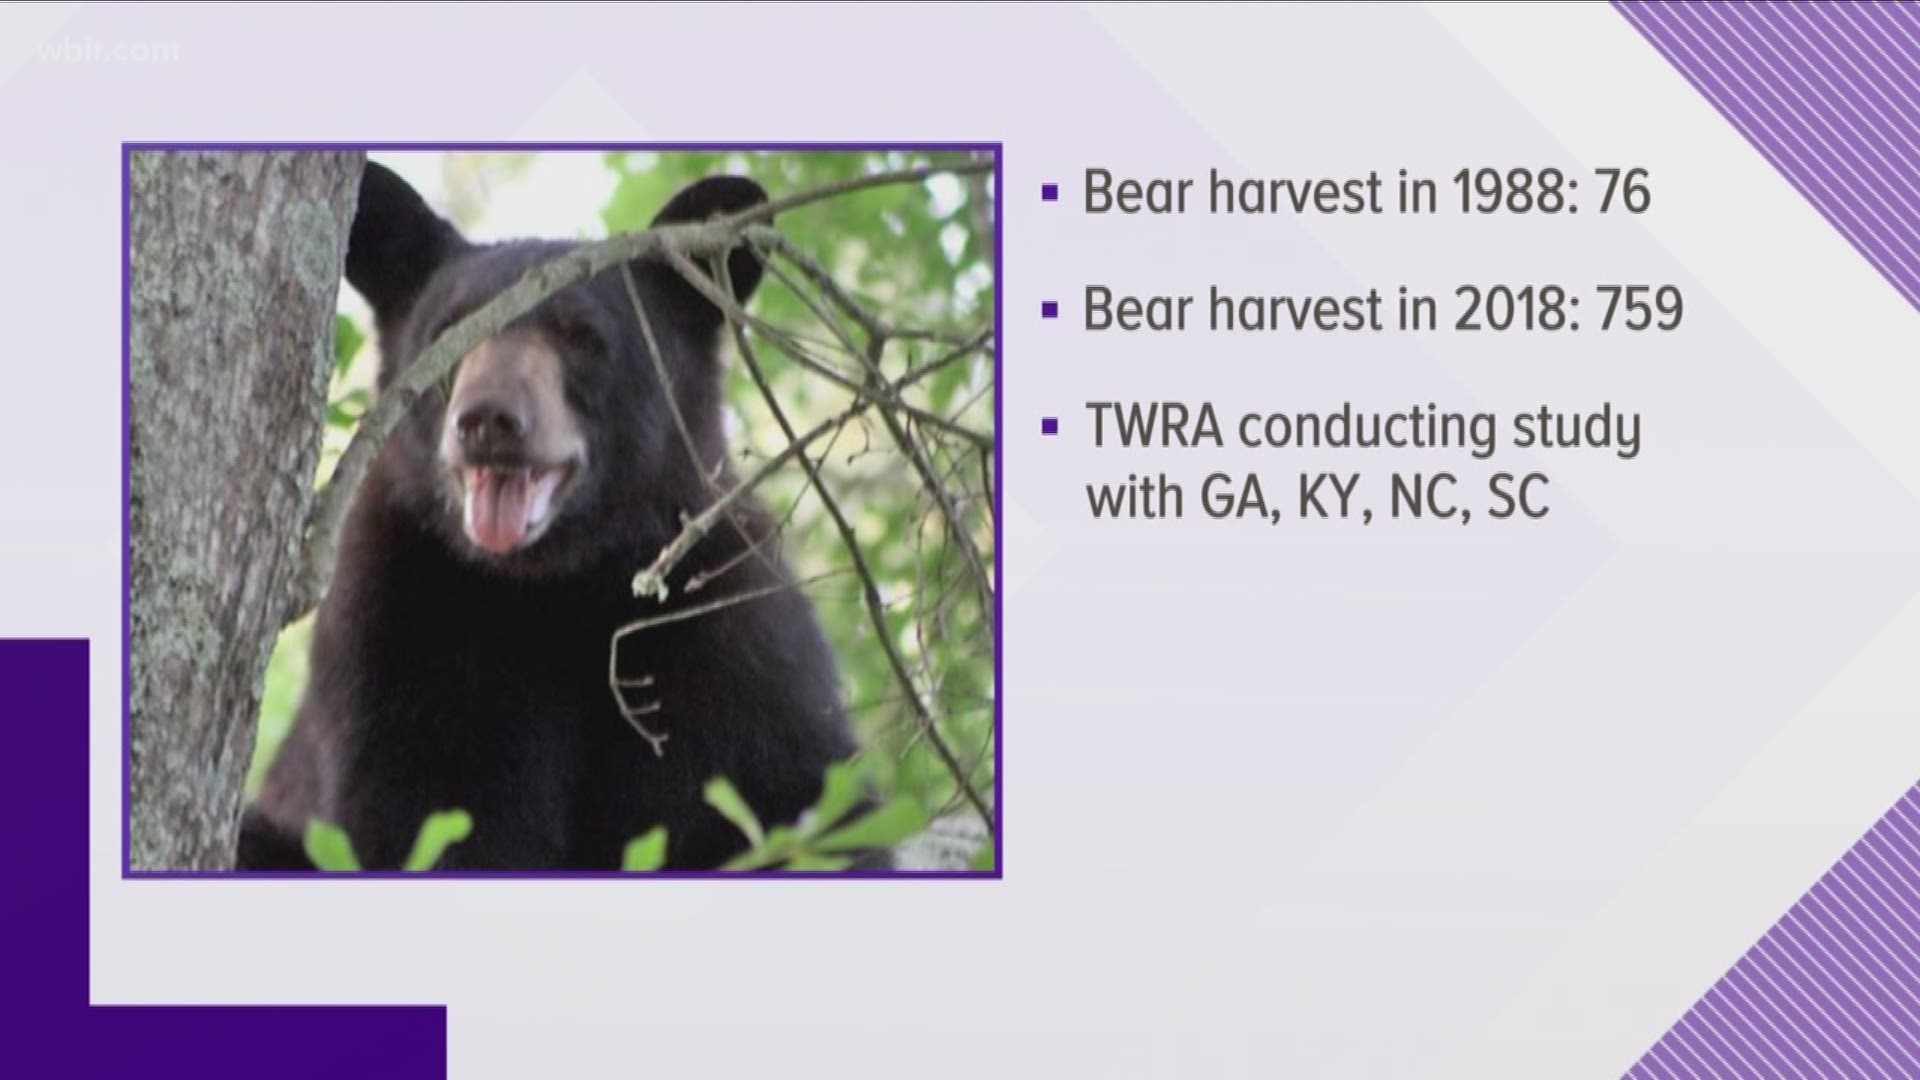 The TWRA says hunters in Tennessee harvested a record number of bears this season.